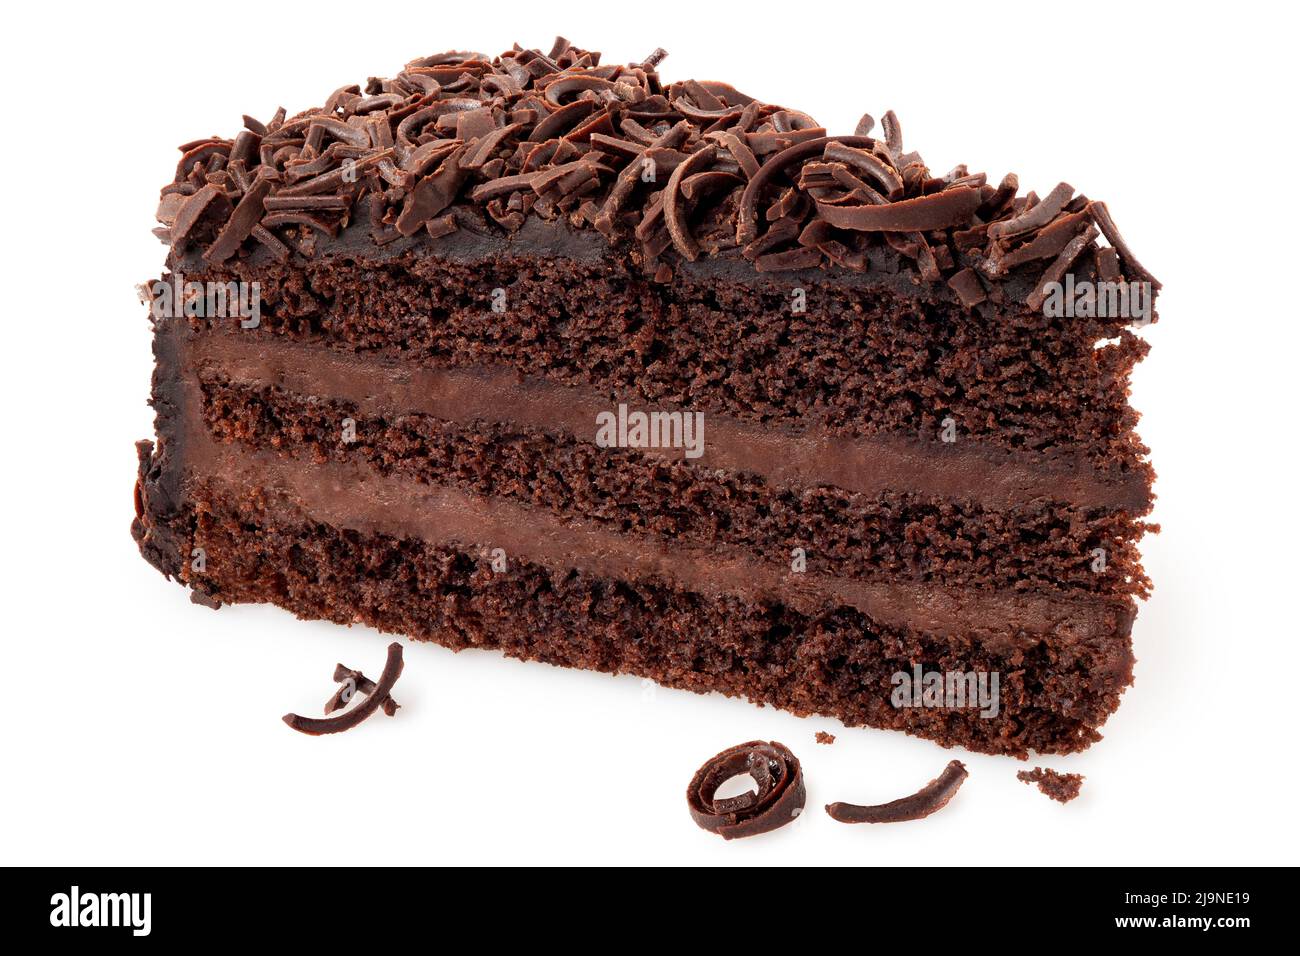 Slice of chocolate cake with cream filling and chocolate shavings isolated on white. Stock Photo